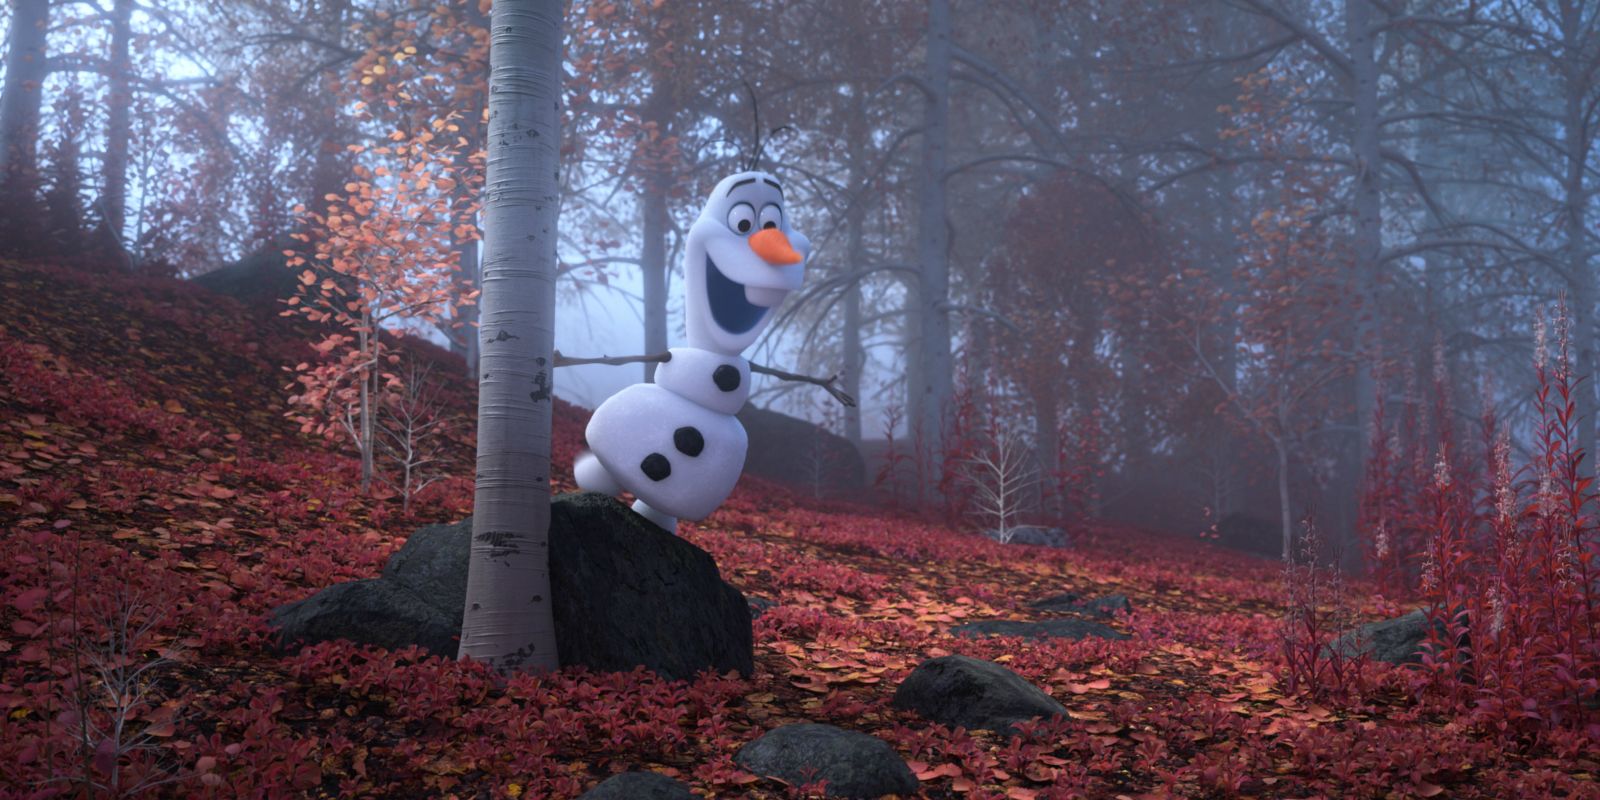 Olaf in Frozen 2 Enchanted Forest